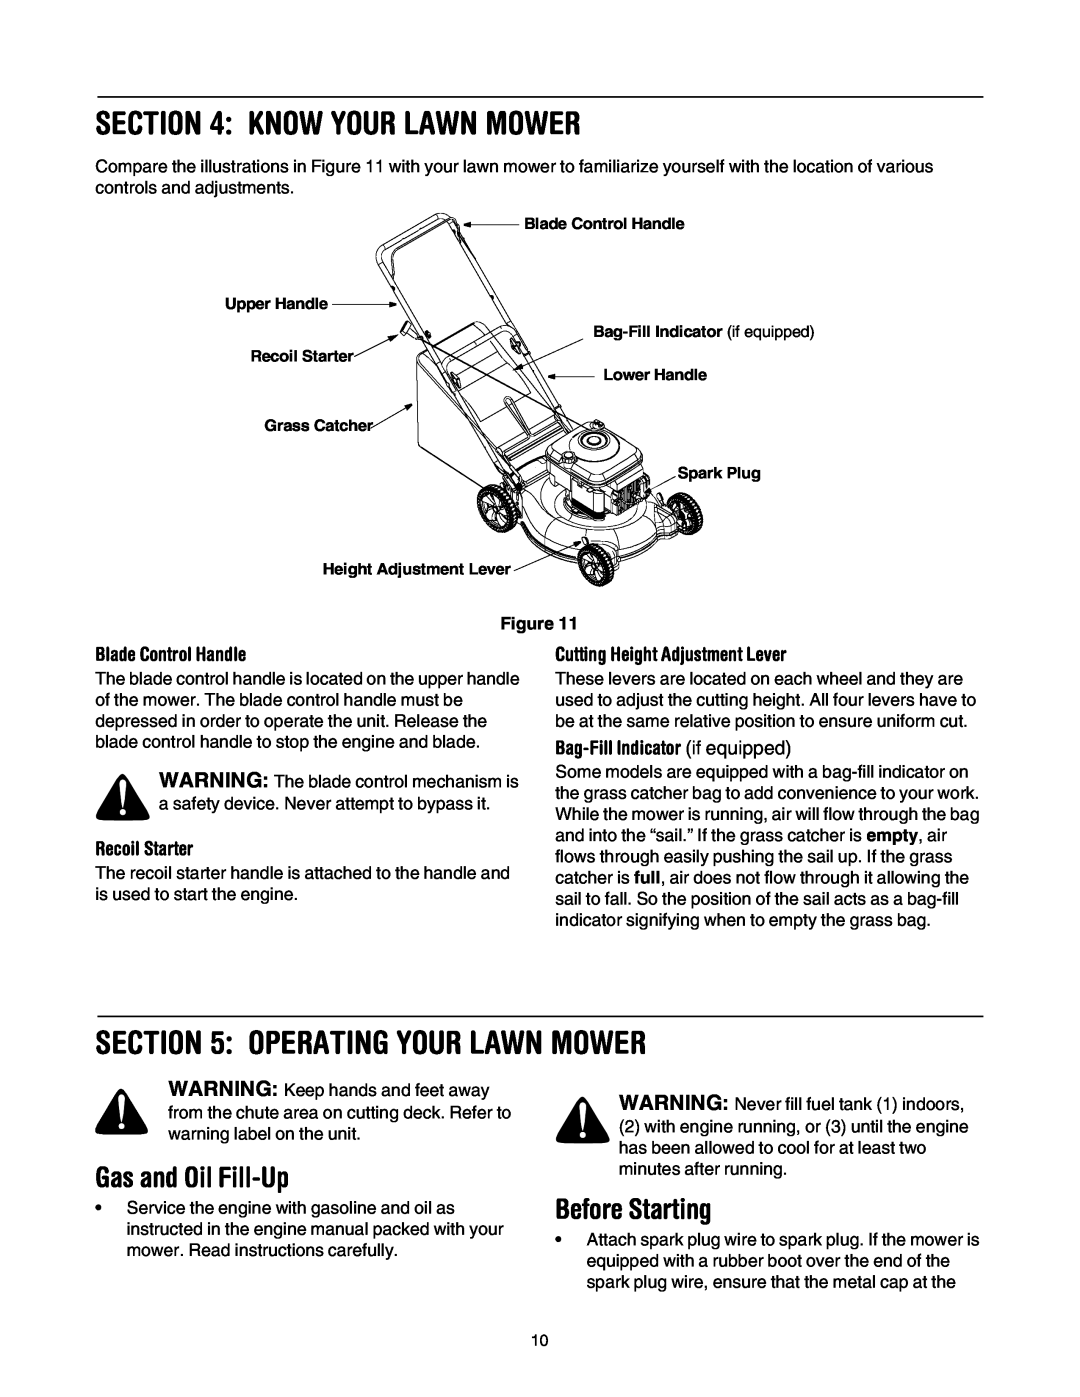 MTD 410 through 419 Know Your Lawn Mower, Operating Your Lawn Mower, Gas and Oil Fill-Up, Before Starting, Recoil Starter 